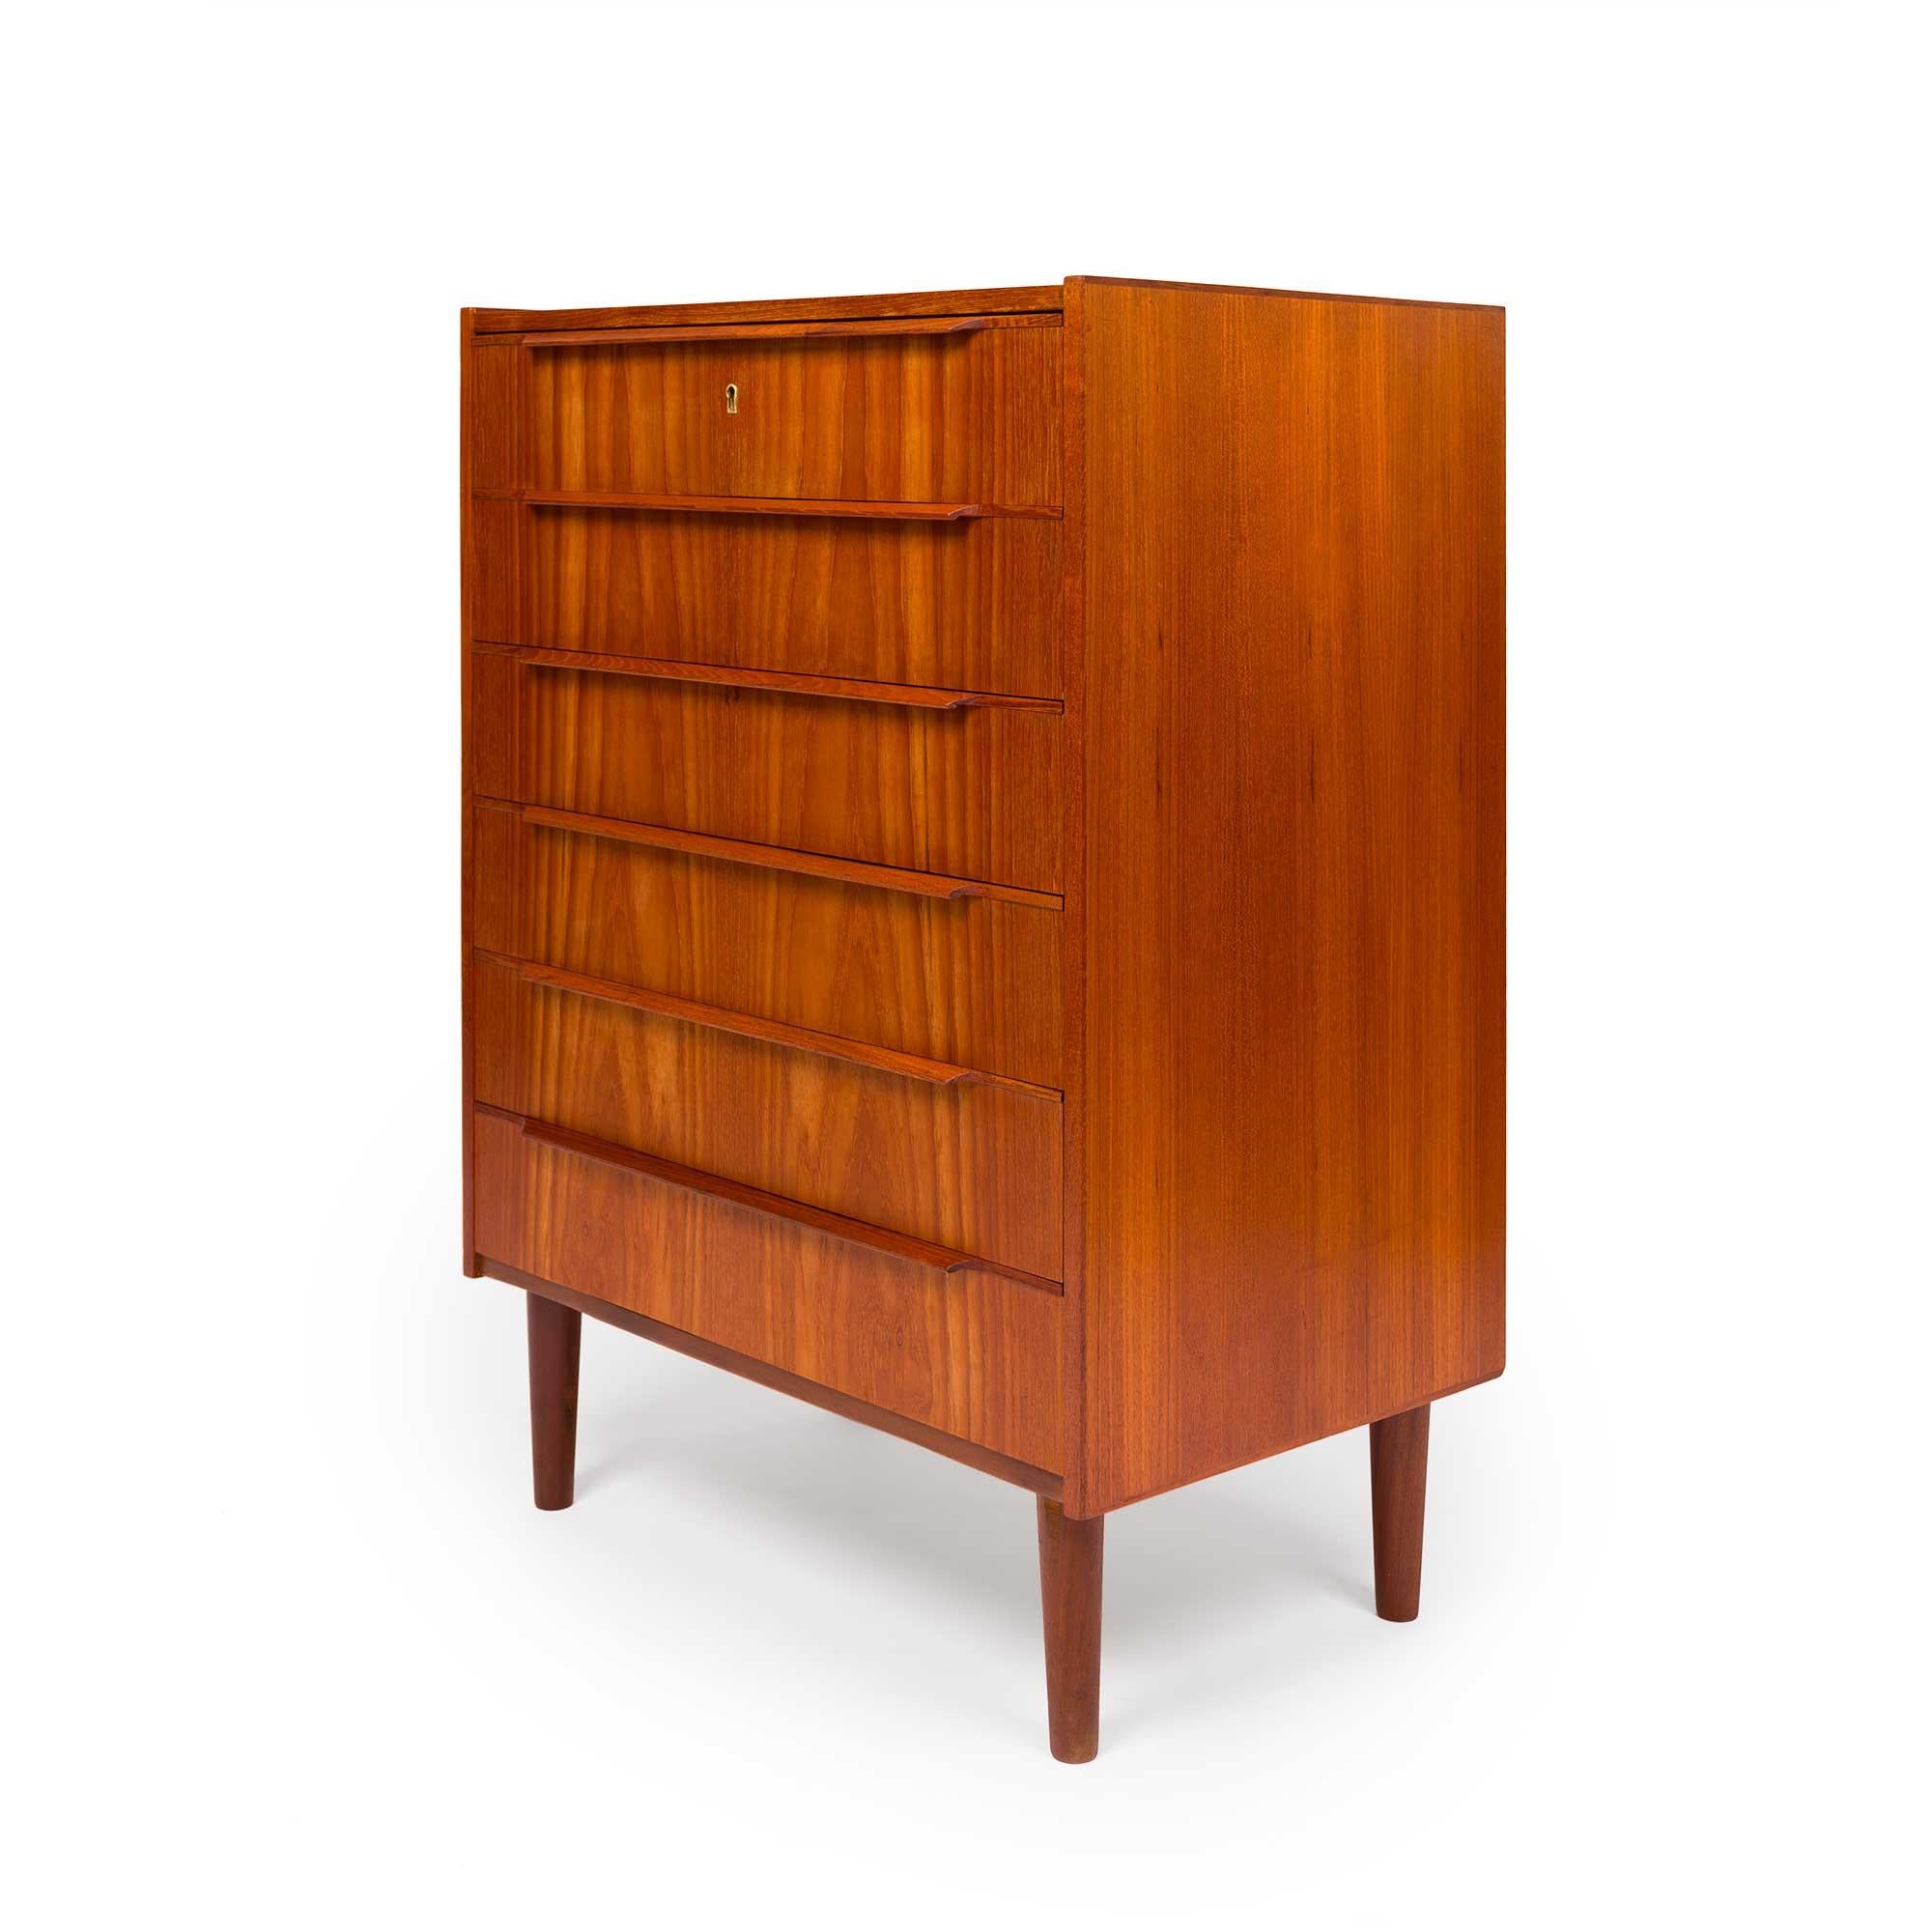 This Danish tallboy chest of drawers embodies the essence of Mid-Century design. Its six drawers, adorned with sculptured wooden handles and seamless dovetail joins, effortlessly combine functionality with elegance. The natural teak grain adorns its